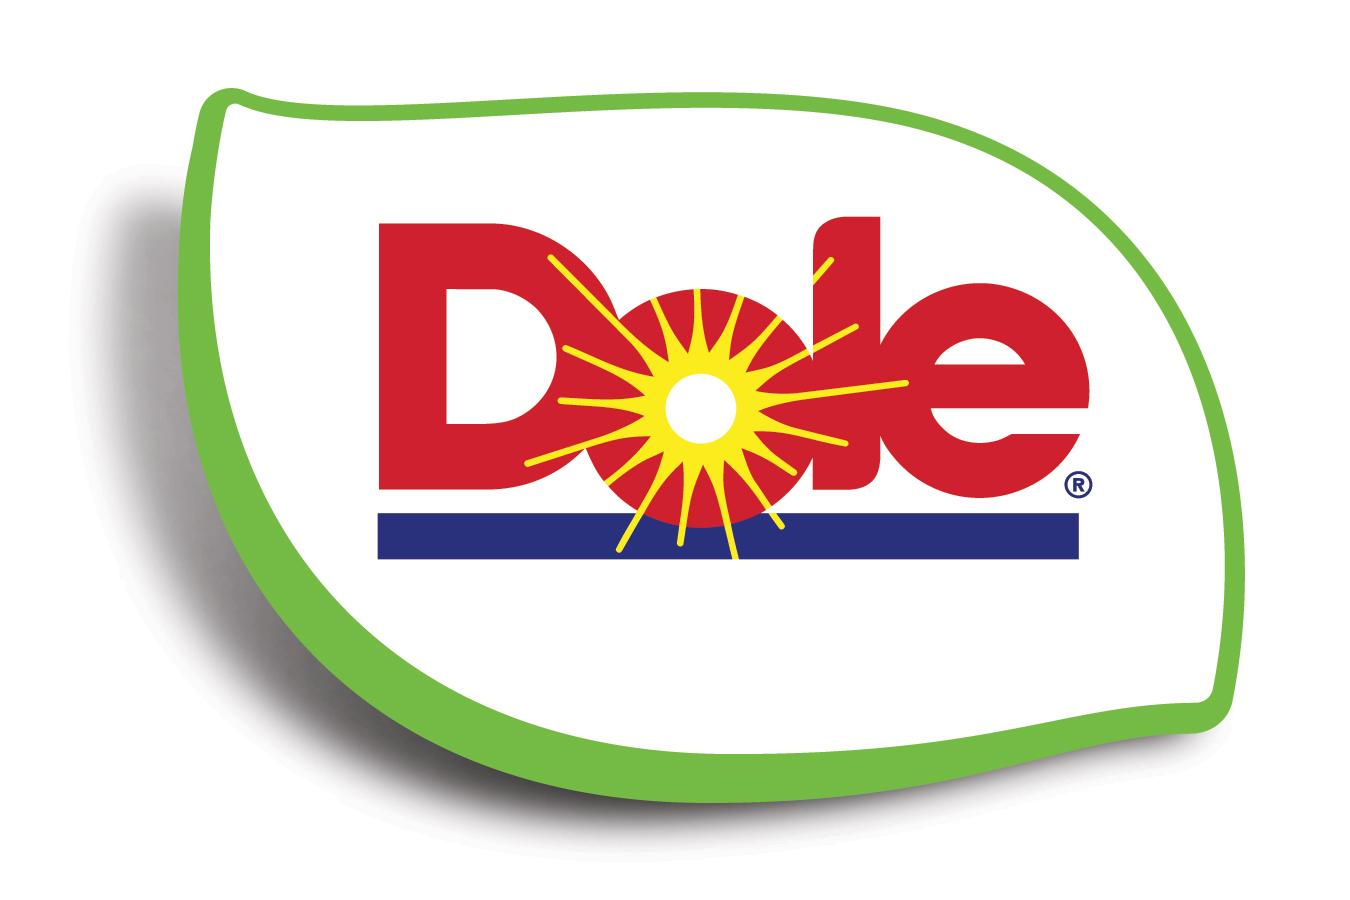 Dole Food Company Logo - Dole Launches Refreshed Brand | Business Wire